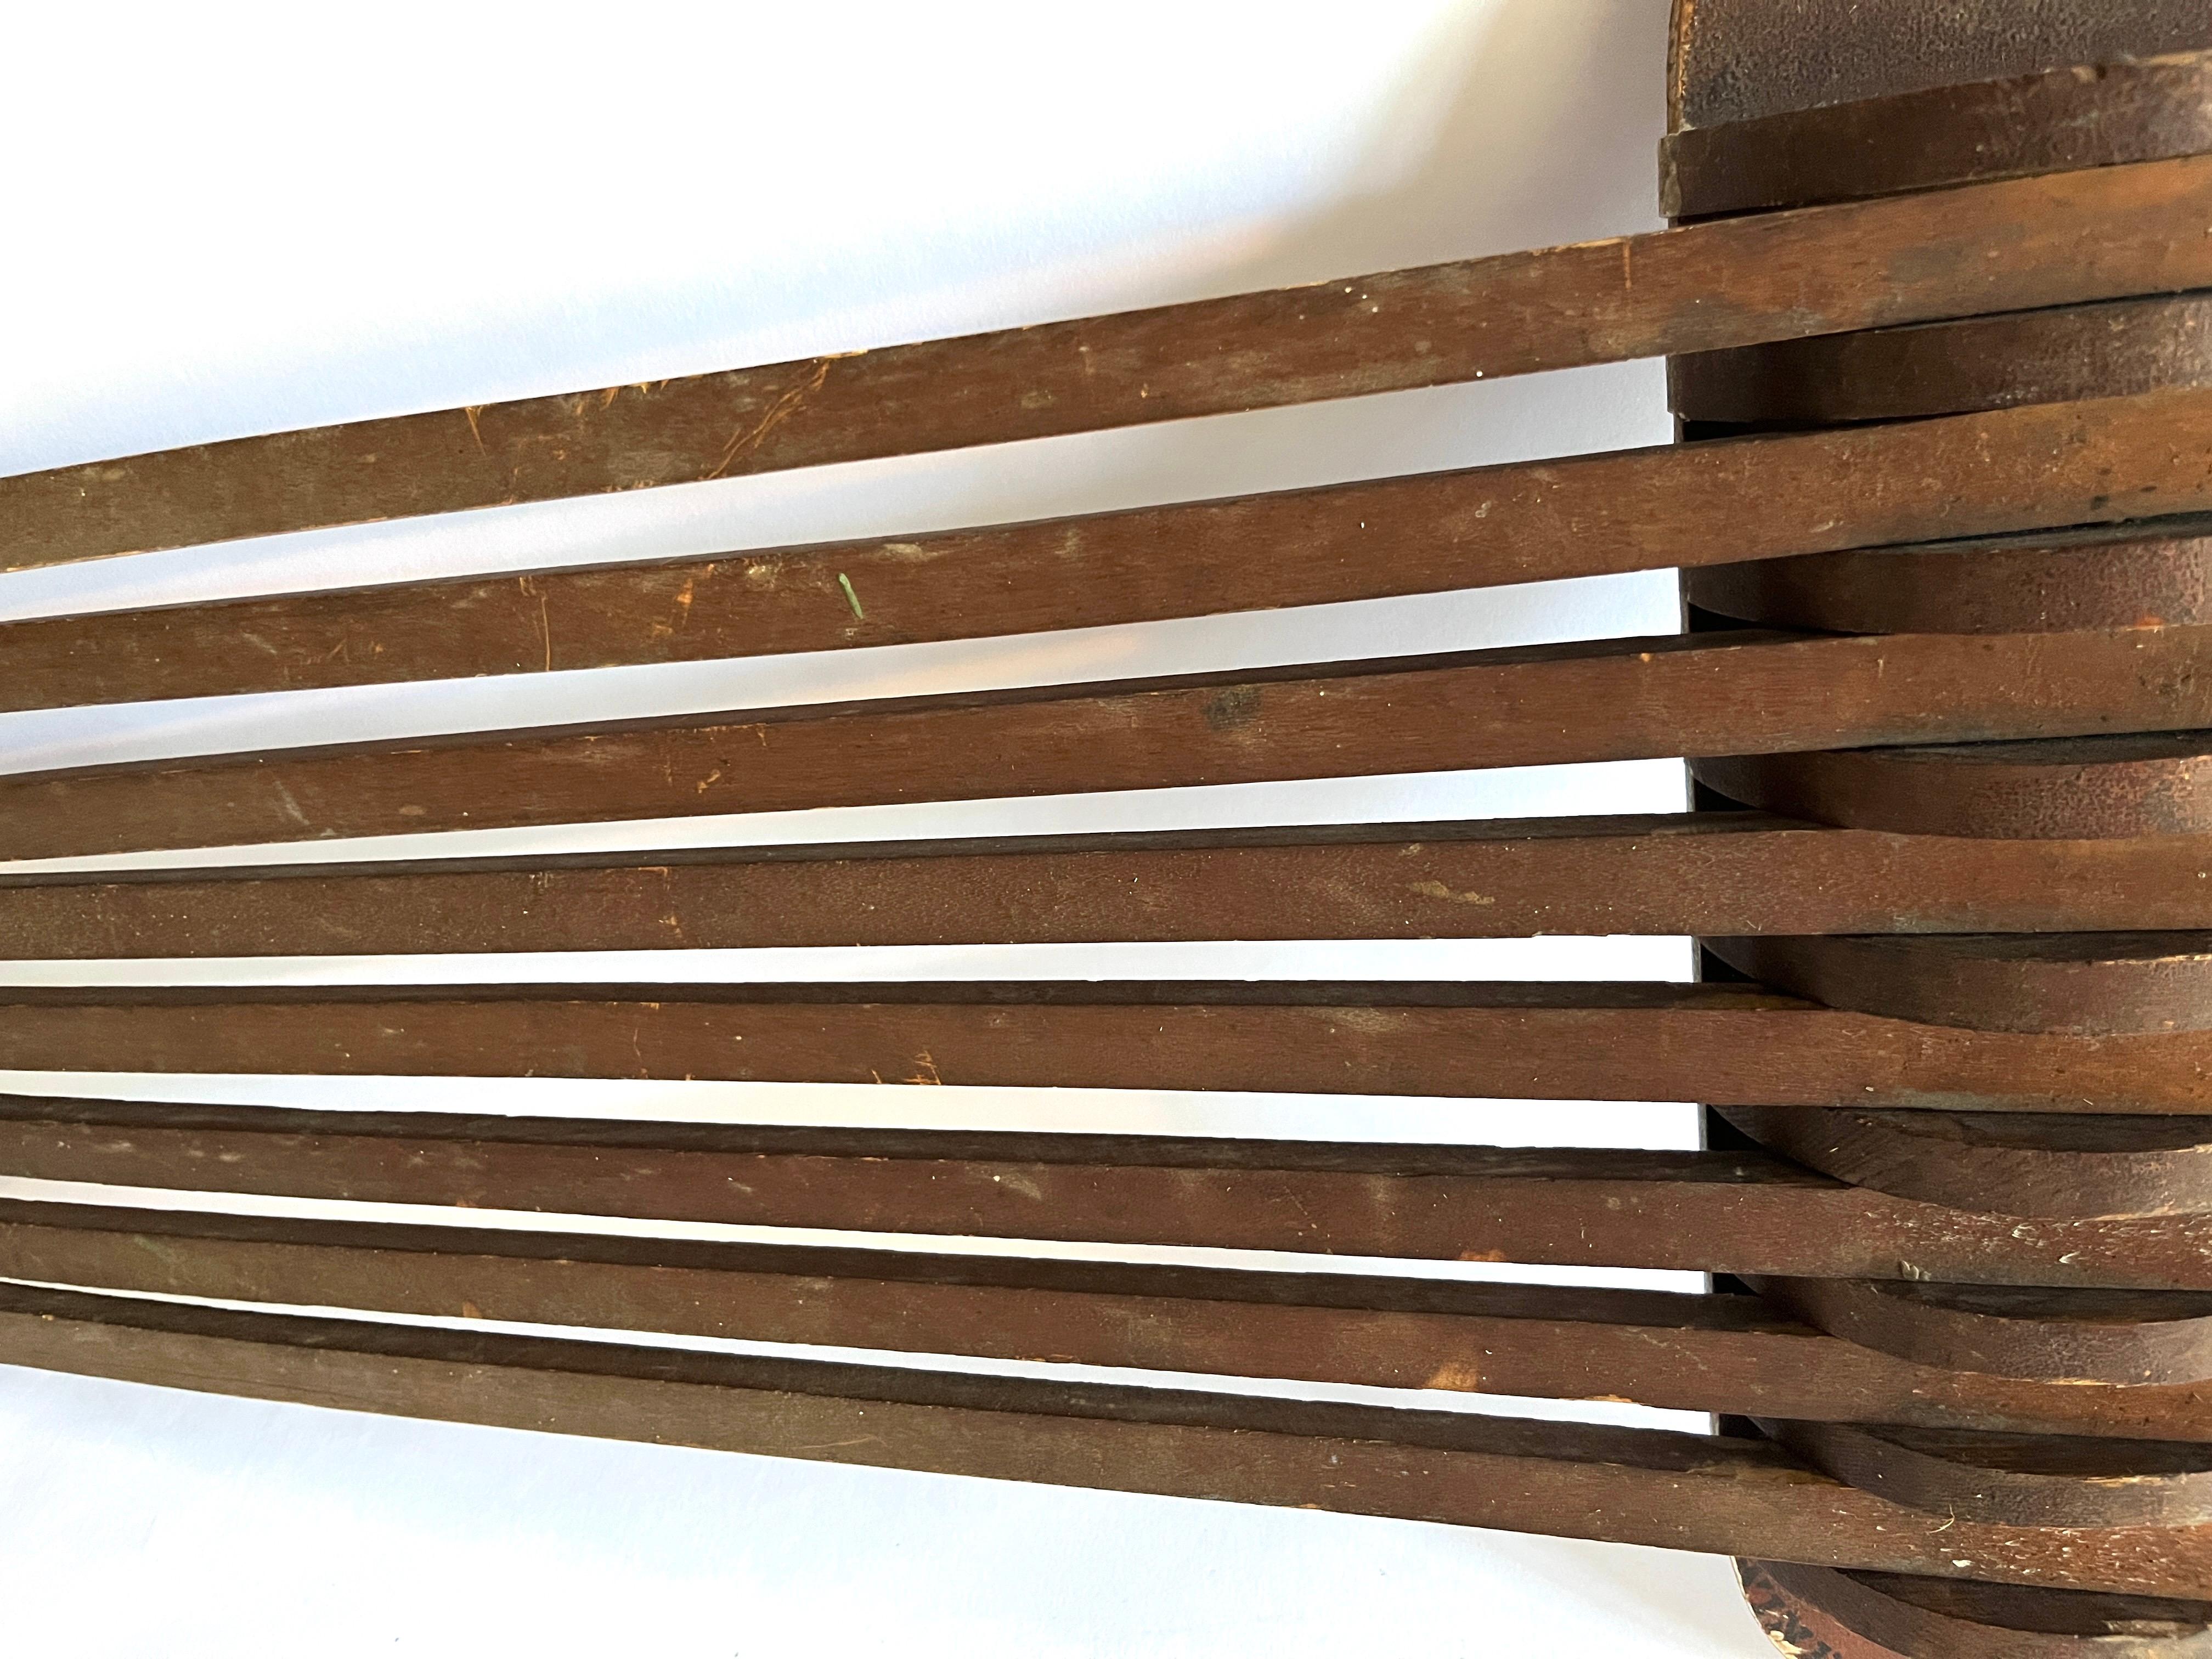 Antique Wall Mounted Wood Drying Rack, Winding Stairway Farmhouse Laundry Decor In Good Condition For Sale In Chicago, IL